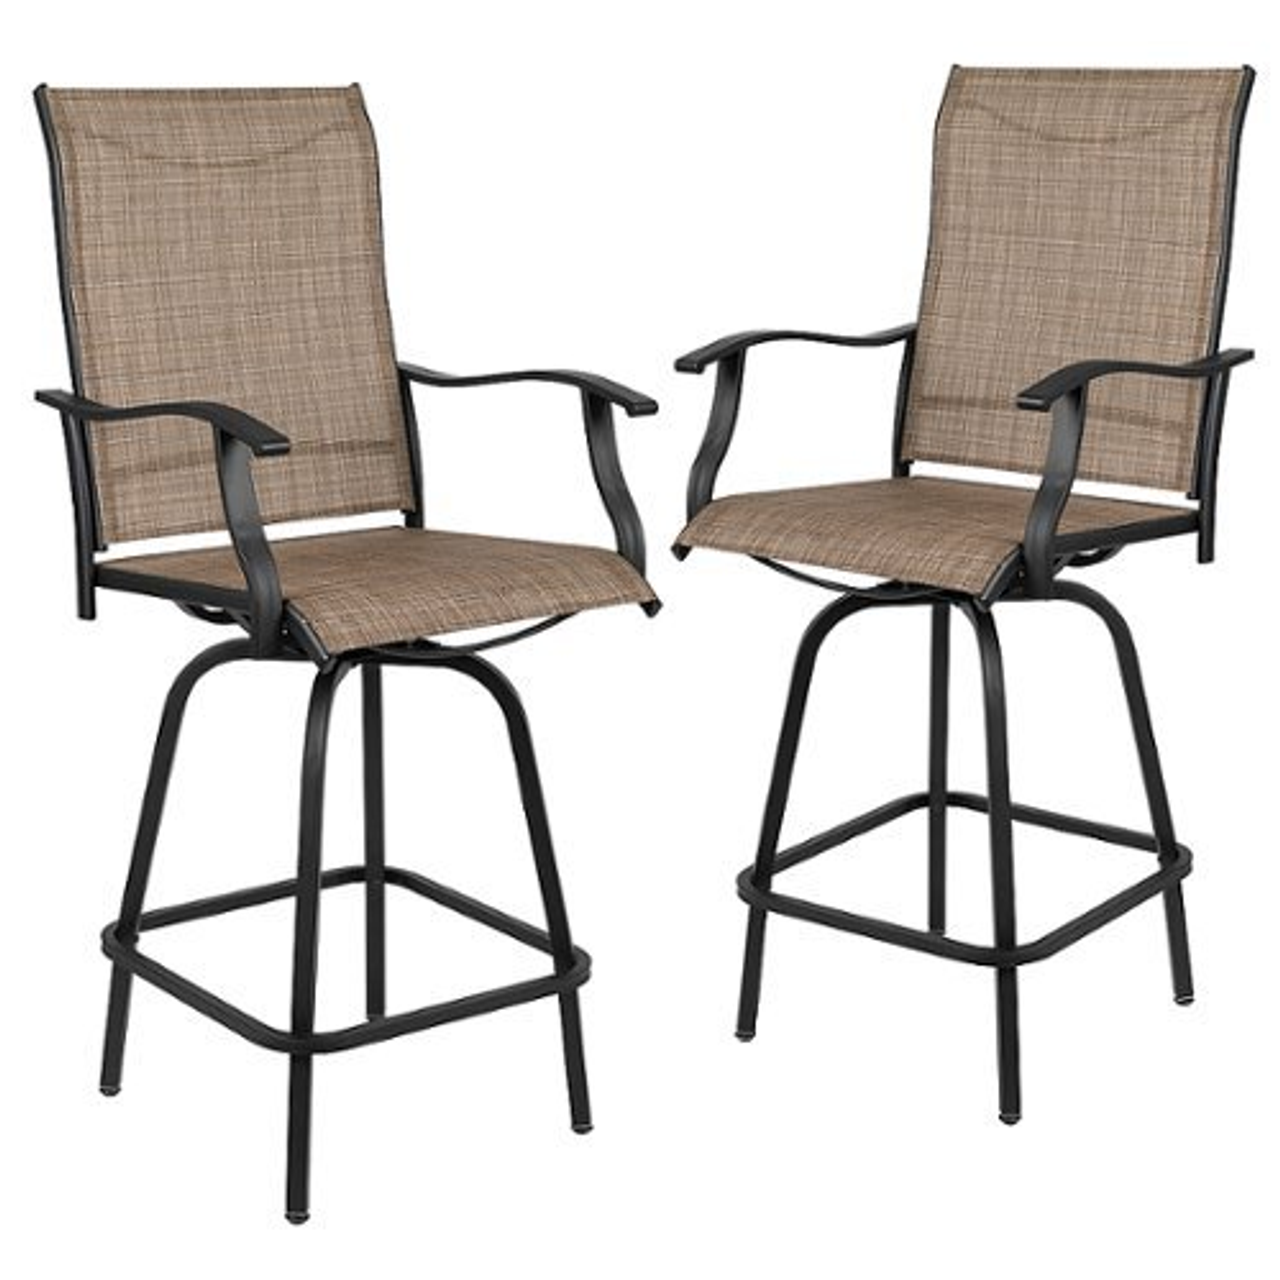 Flash Furniture - Valerie Patio Chair (set of 2) - Brown